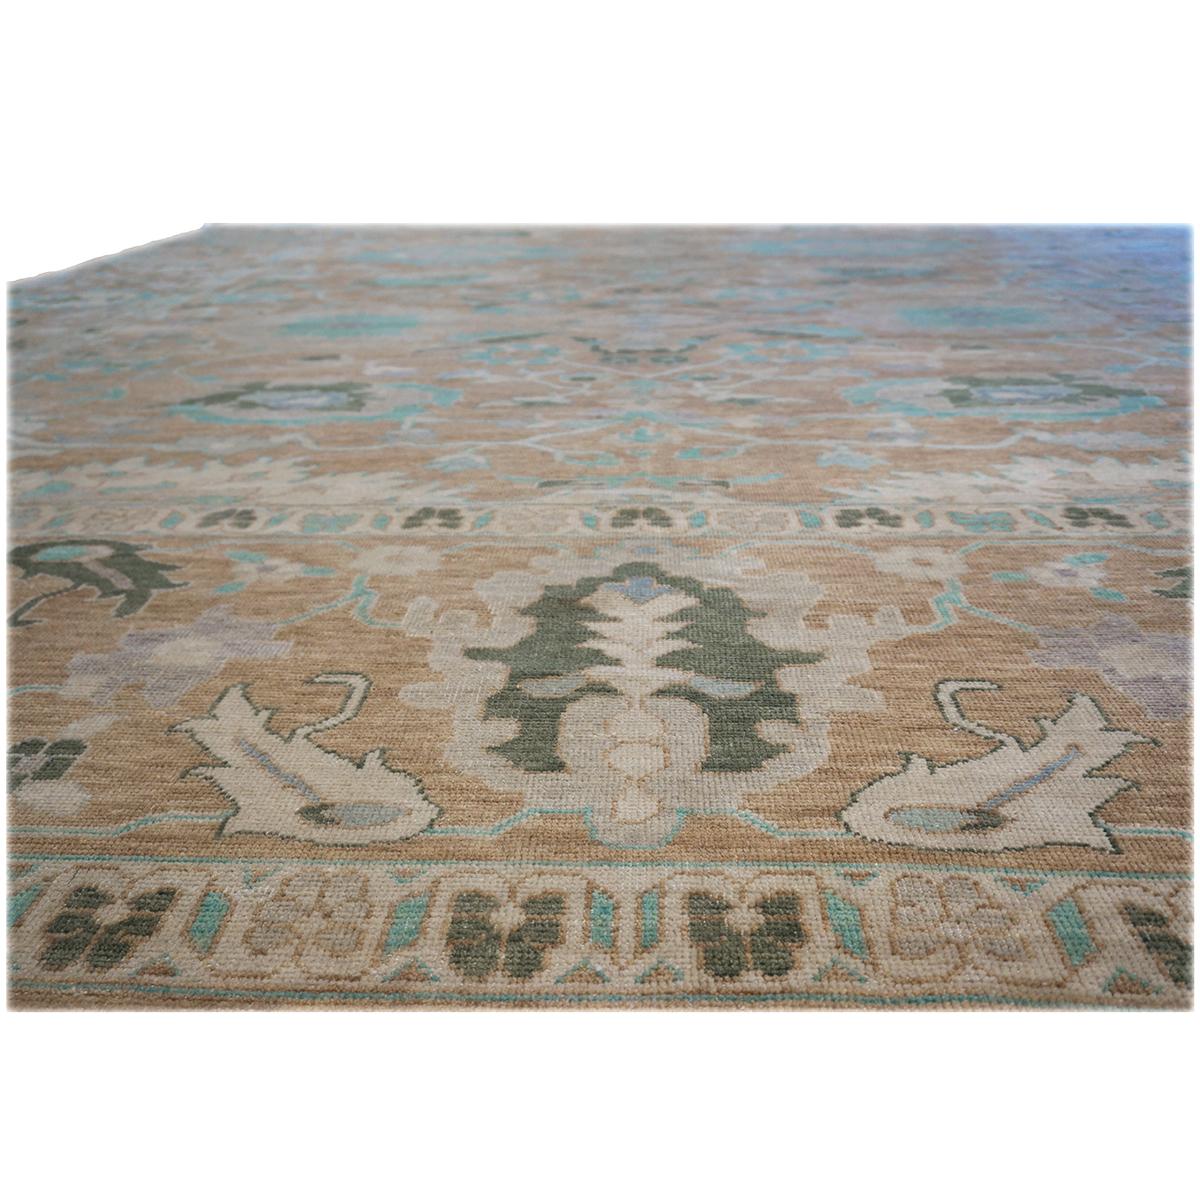 21st Century Sultanabad 12x15 Brown & Turquoise Handmade Area Rug In Excellent Condition For Sale In Houston, TX